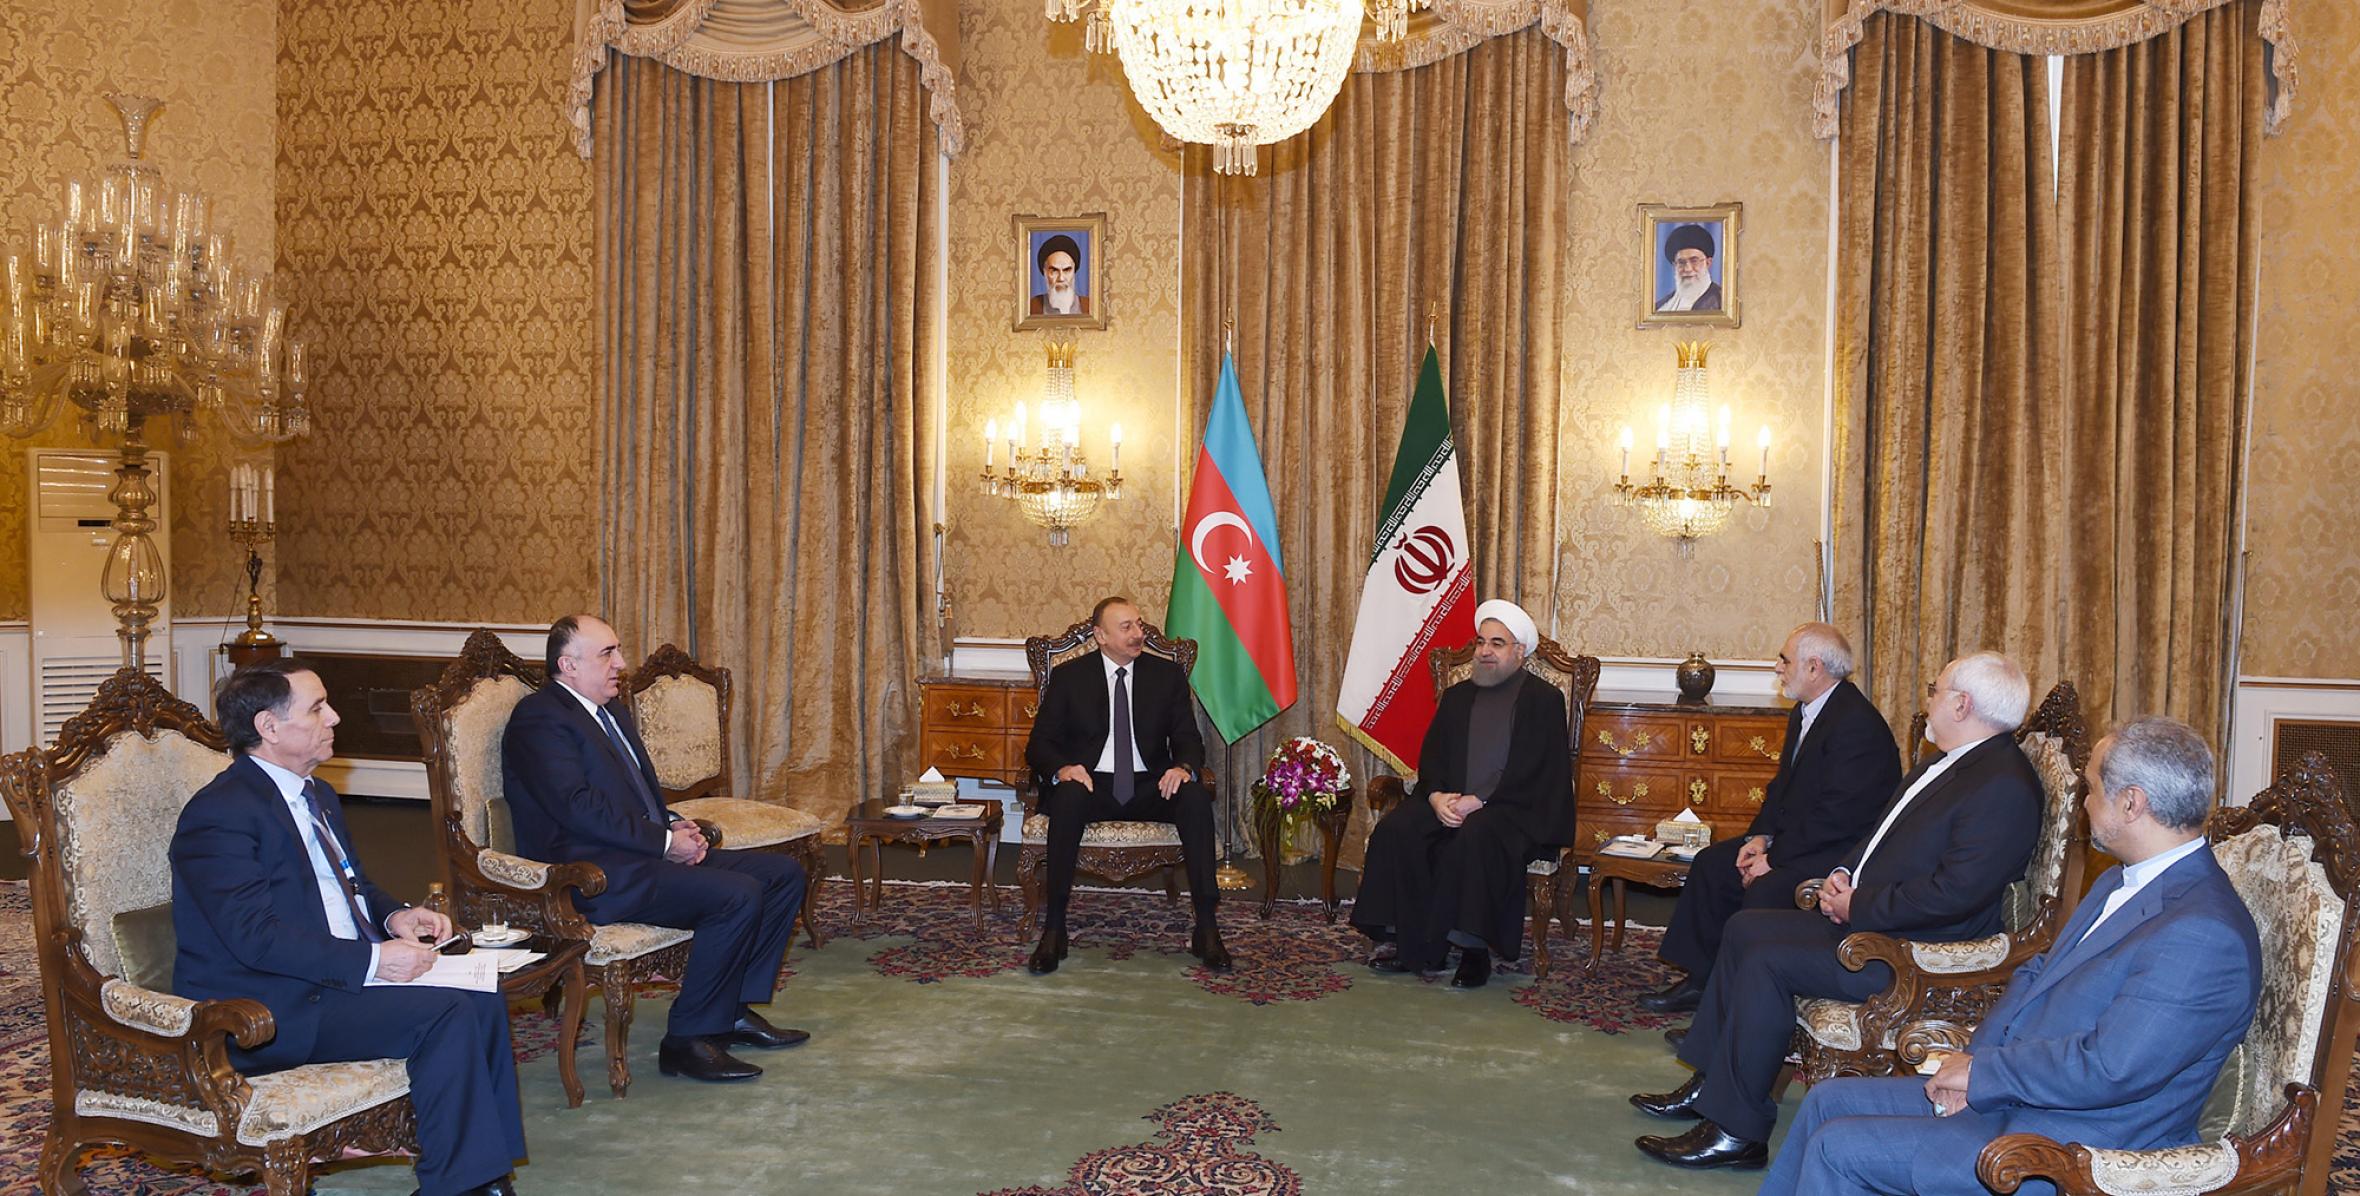 Ilham Aliyev and Iranian President Hassan Rouhani met in limited format